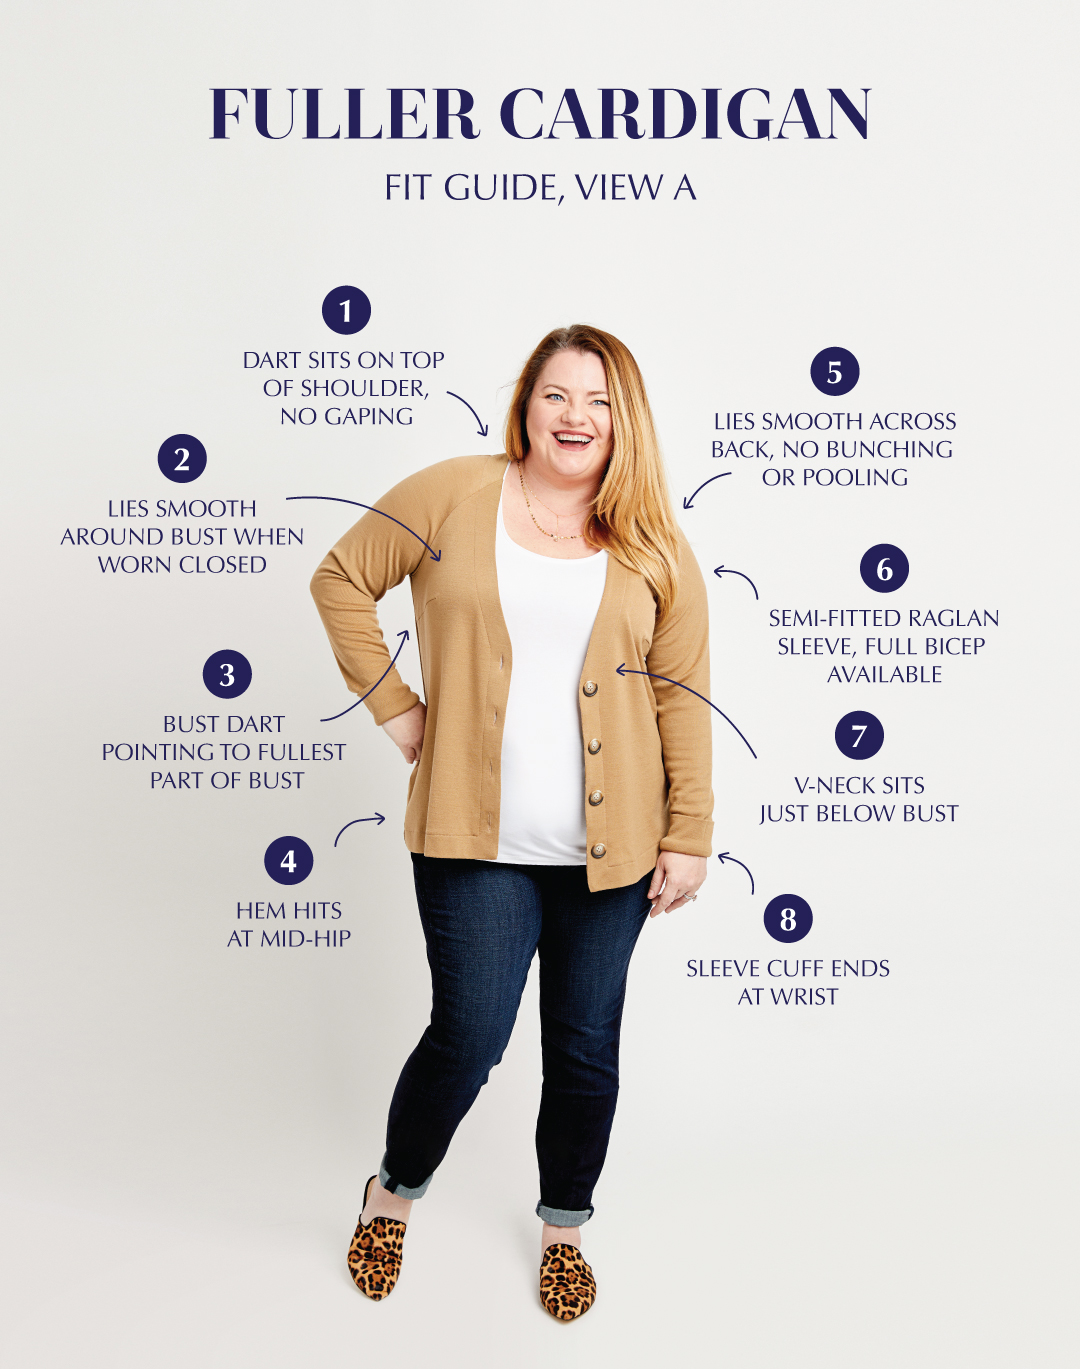 How Should the Fuller Cardigan Fit?